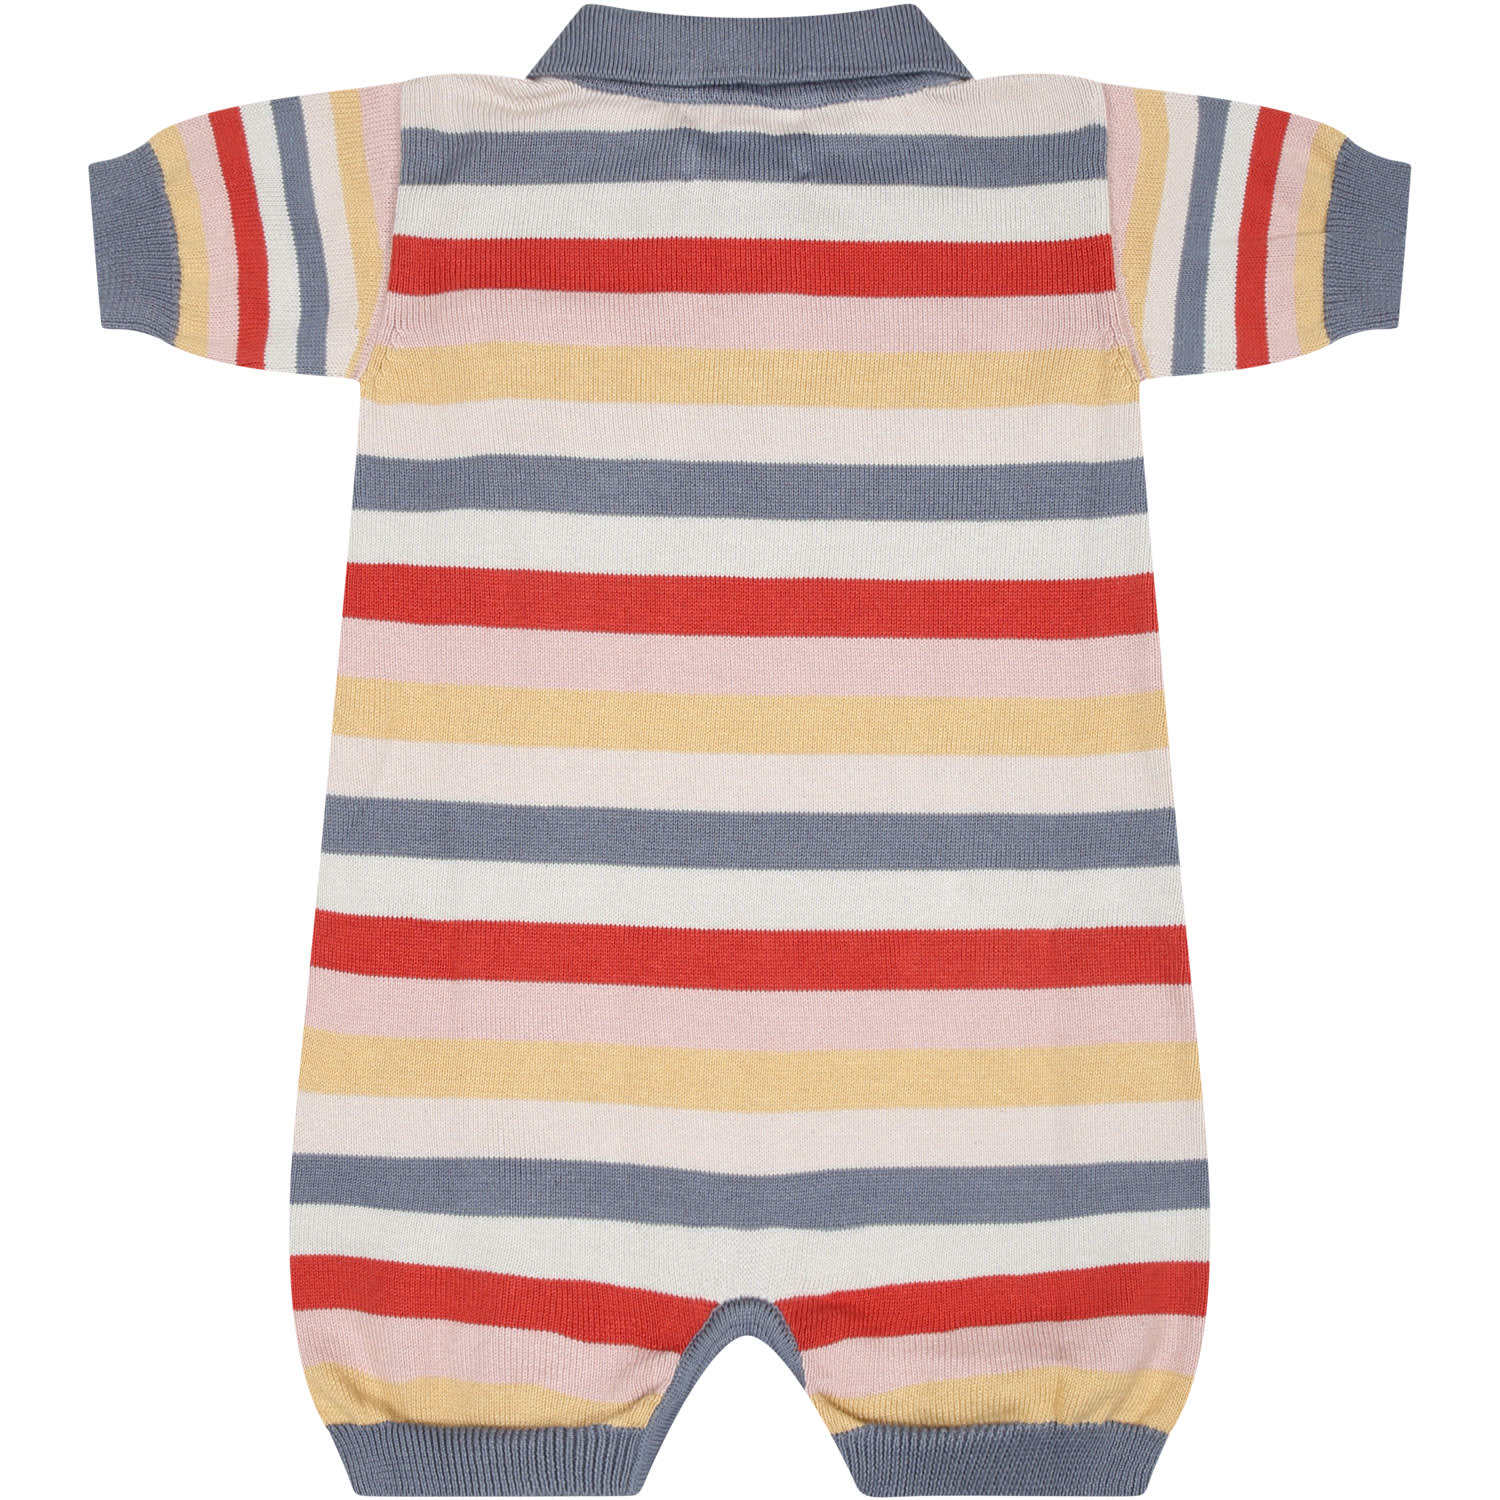 Shop Coco Au Lait Multicolor Romper For Baby Boy With Striped Pattern